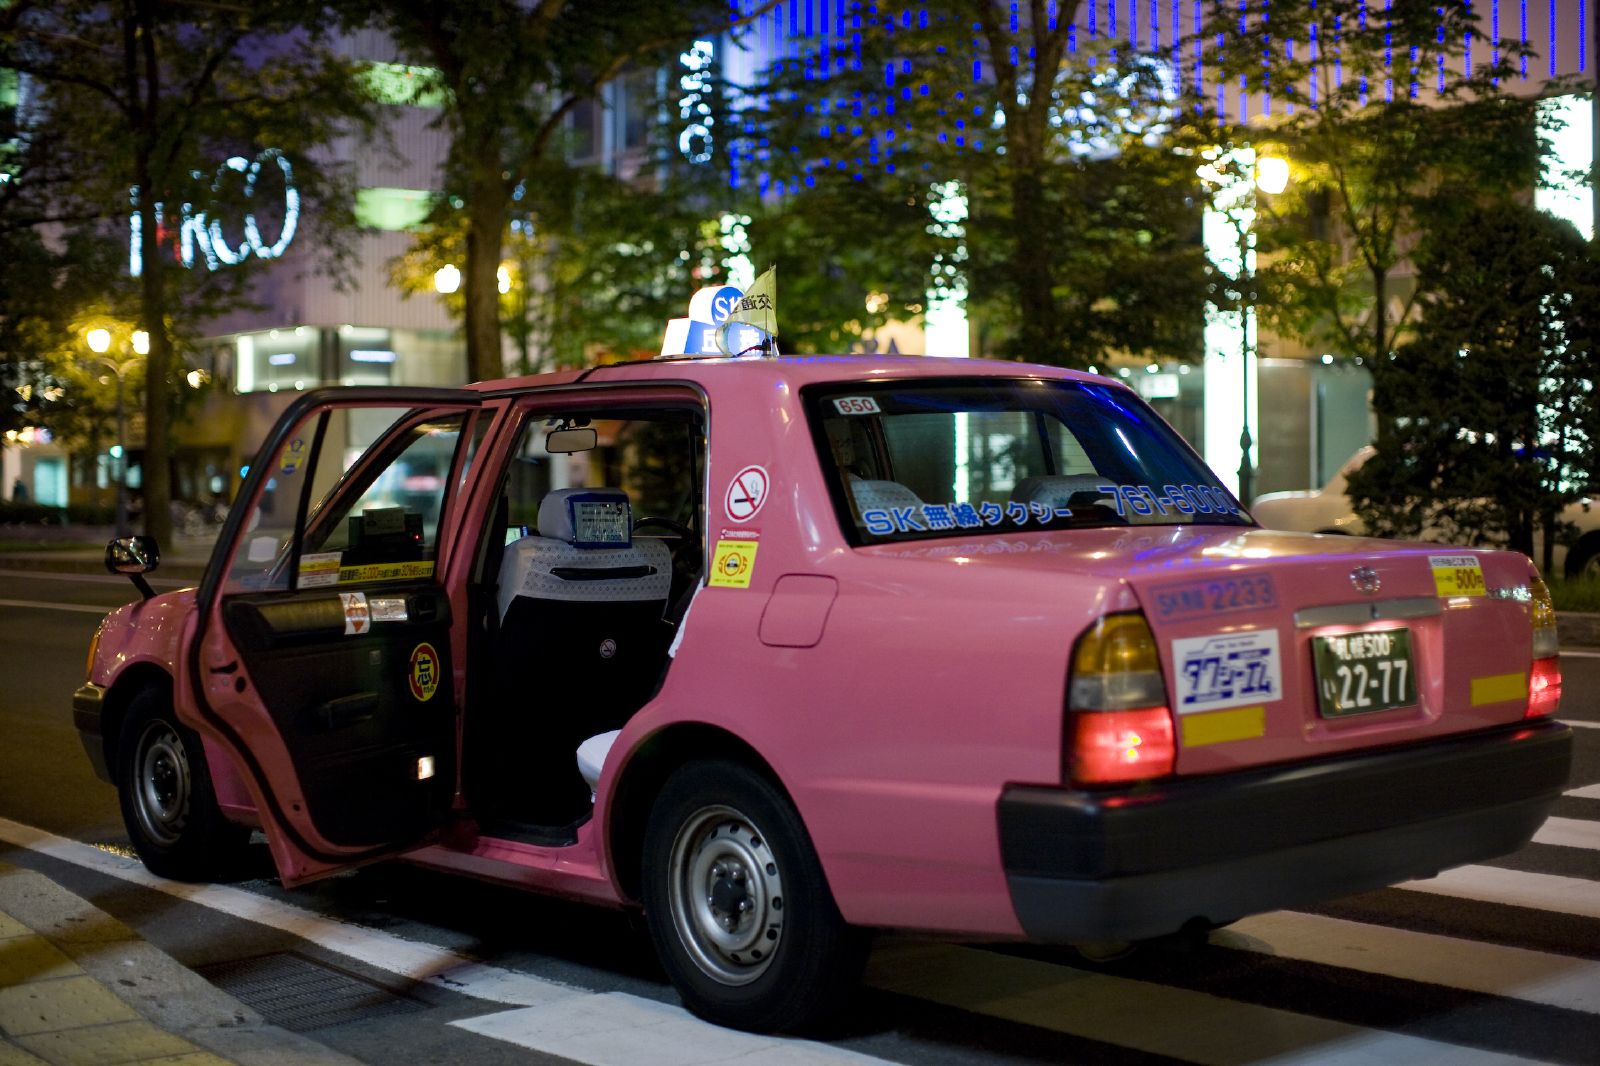 the small car has been painted pink to brighten up the city night